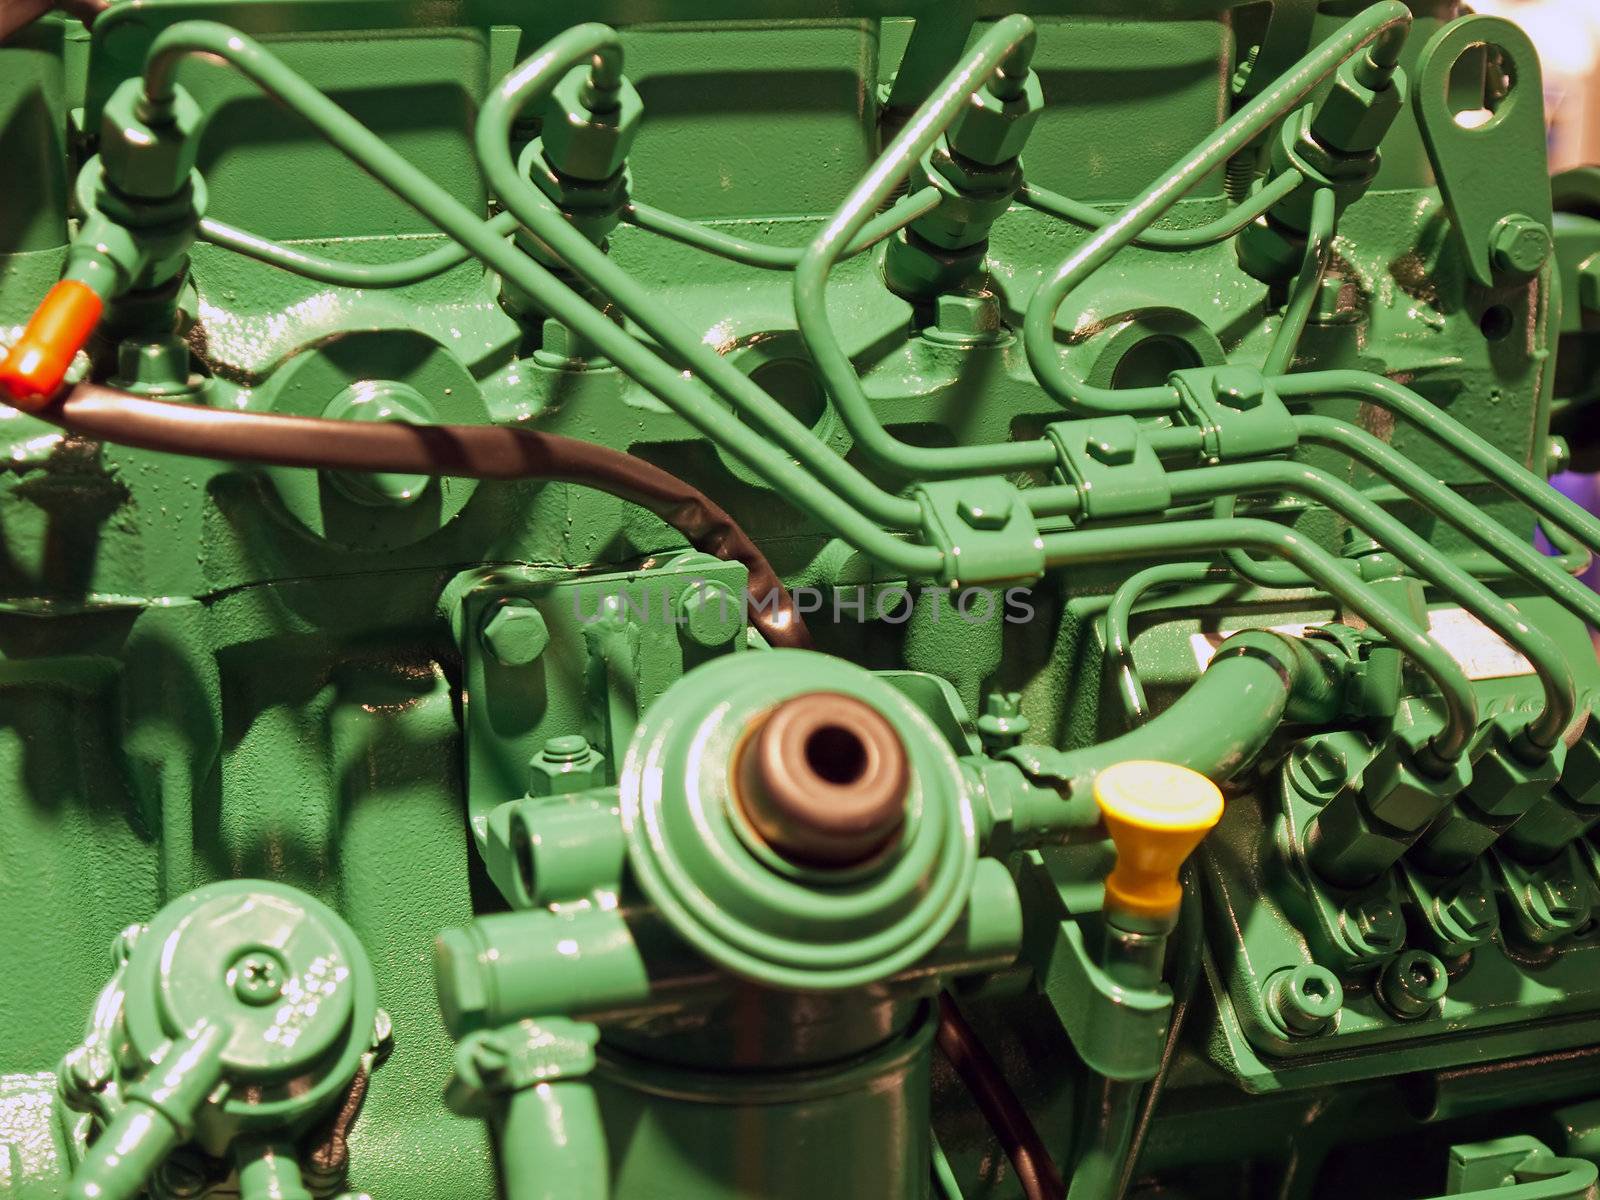 Details of a diesel engine motor by Ronyzmbow